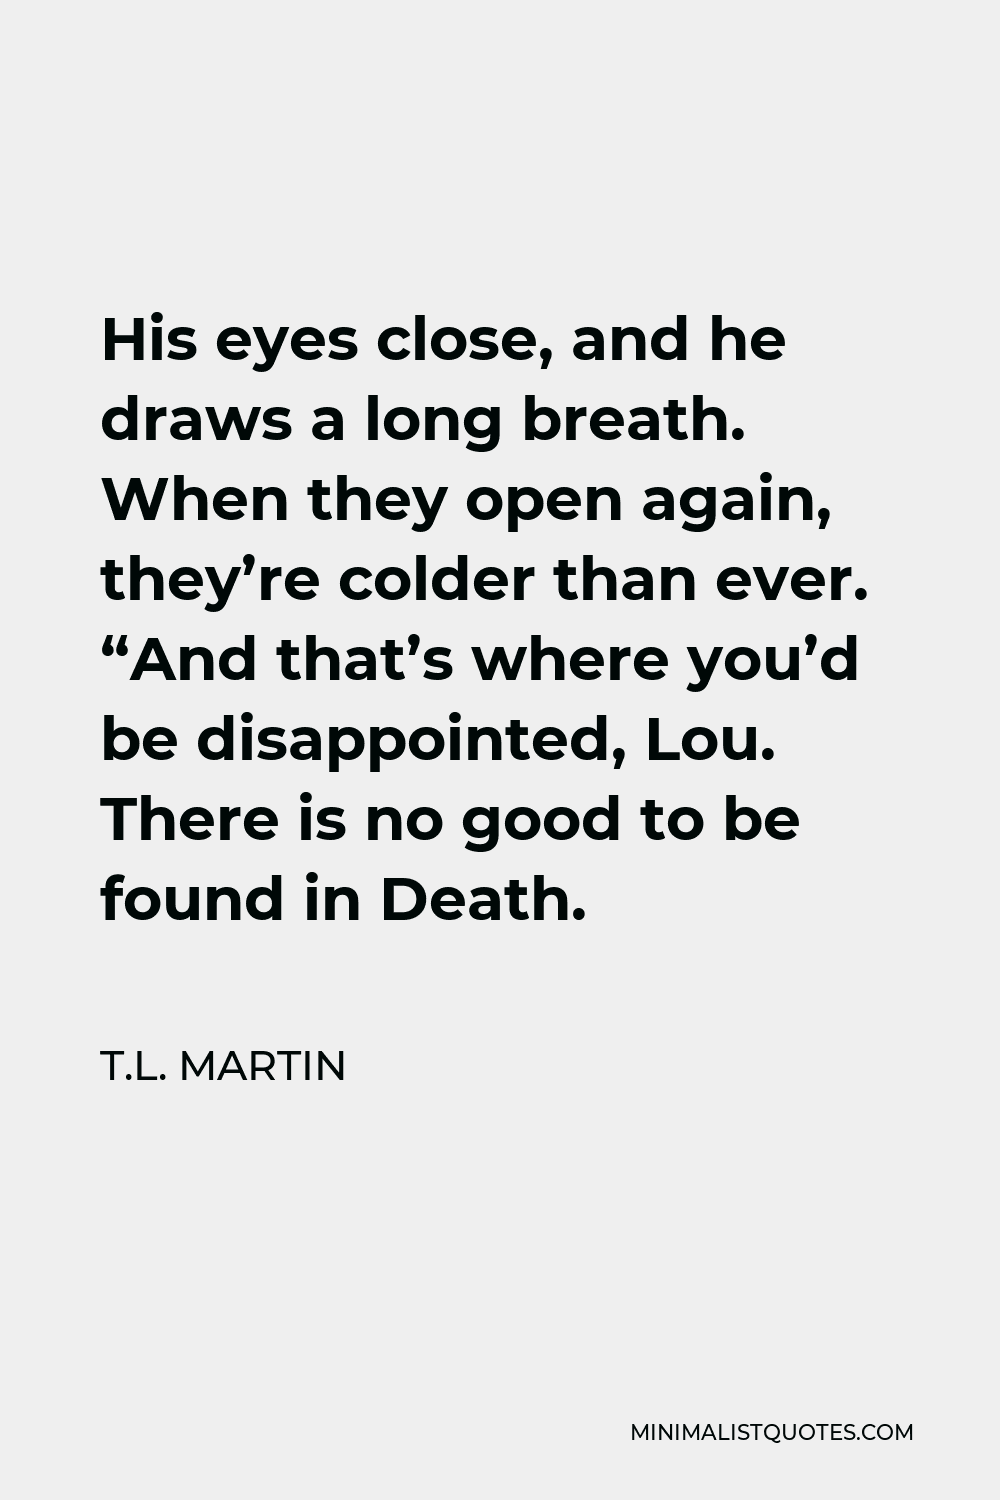 T.L. Martin Quote - His eyes close, and he draws a long breath. When they open again, they’re colder than ever. “And that’s where you’d be disappointed, Lou.There is no good to be found in Death.